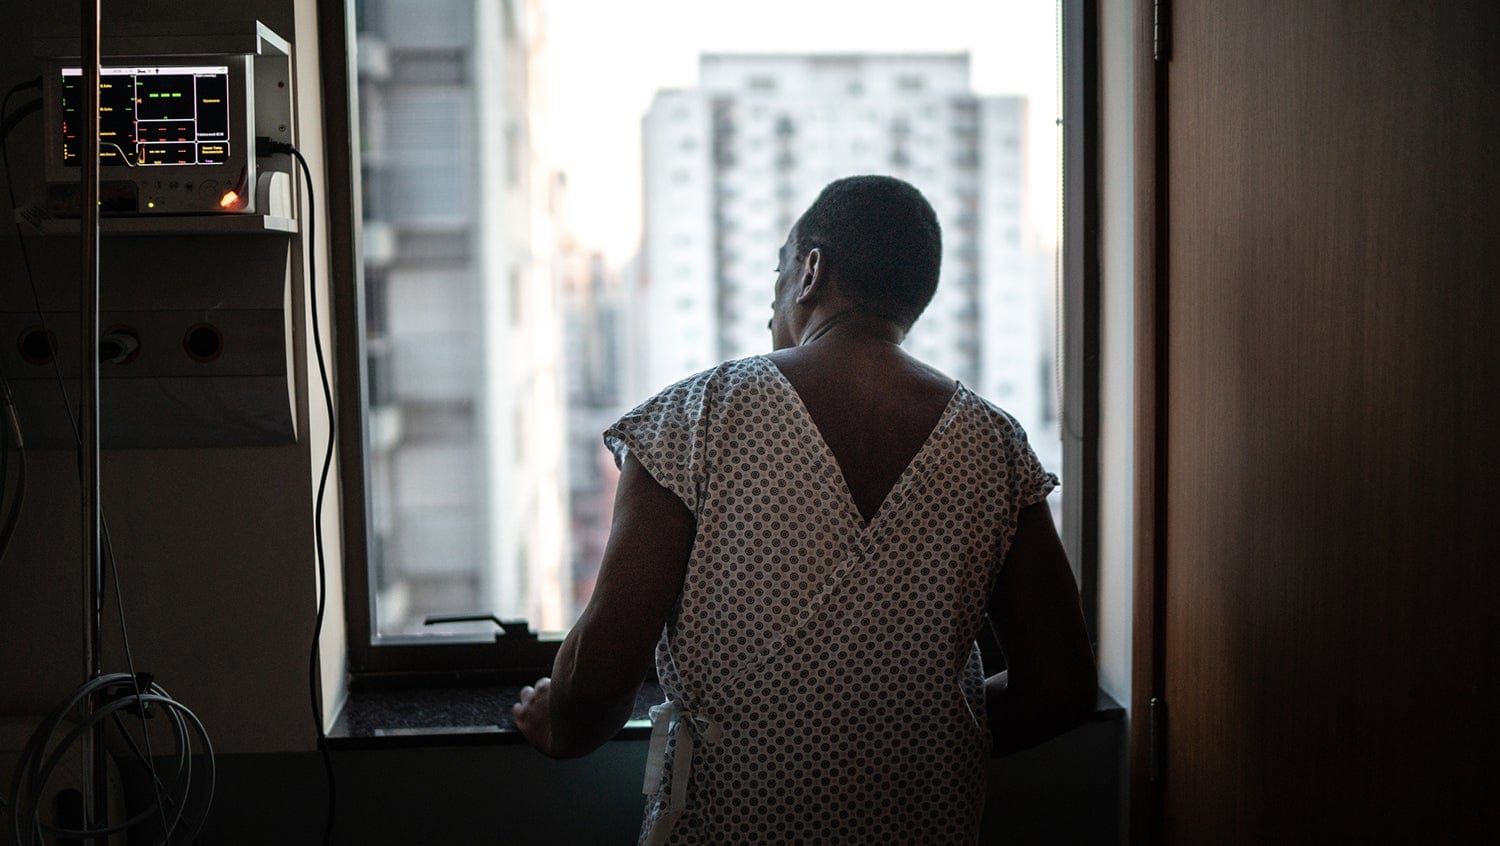 Rear view of a patient at the hospital looking through window